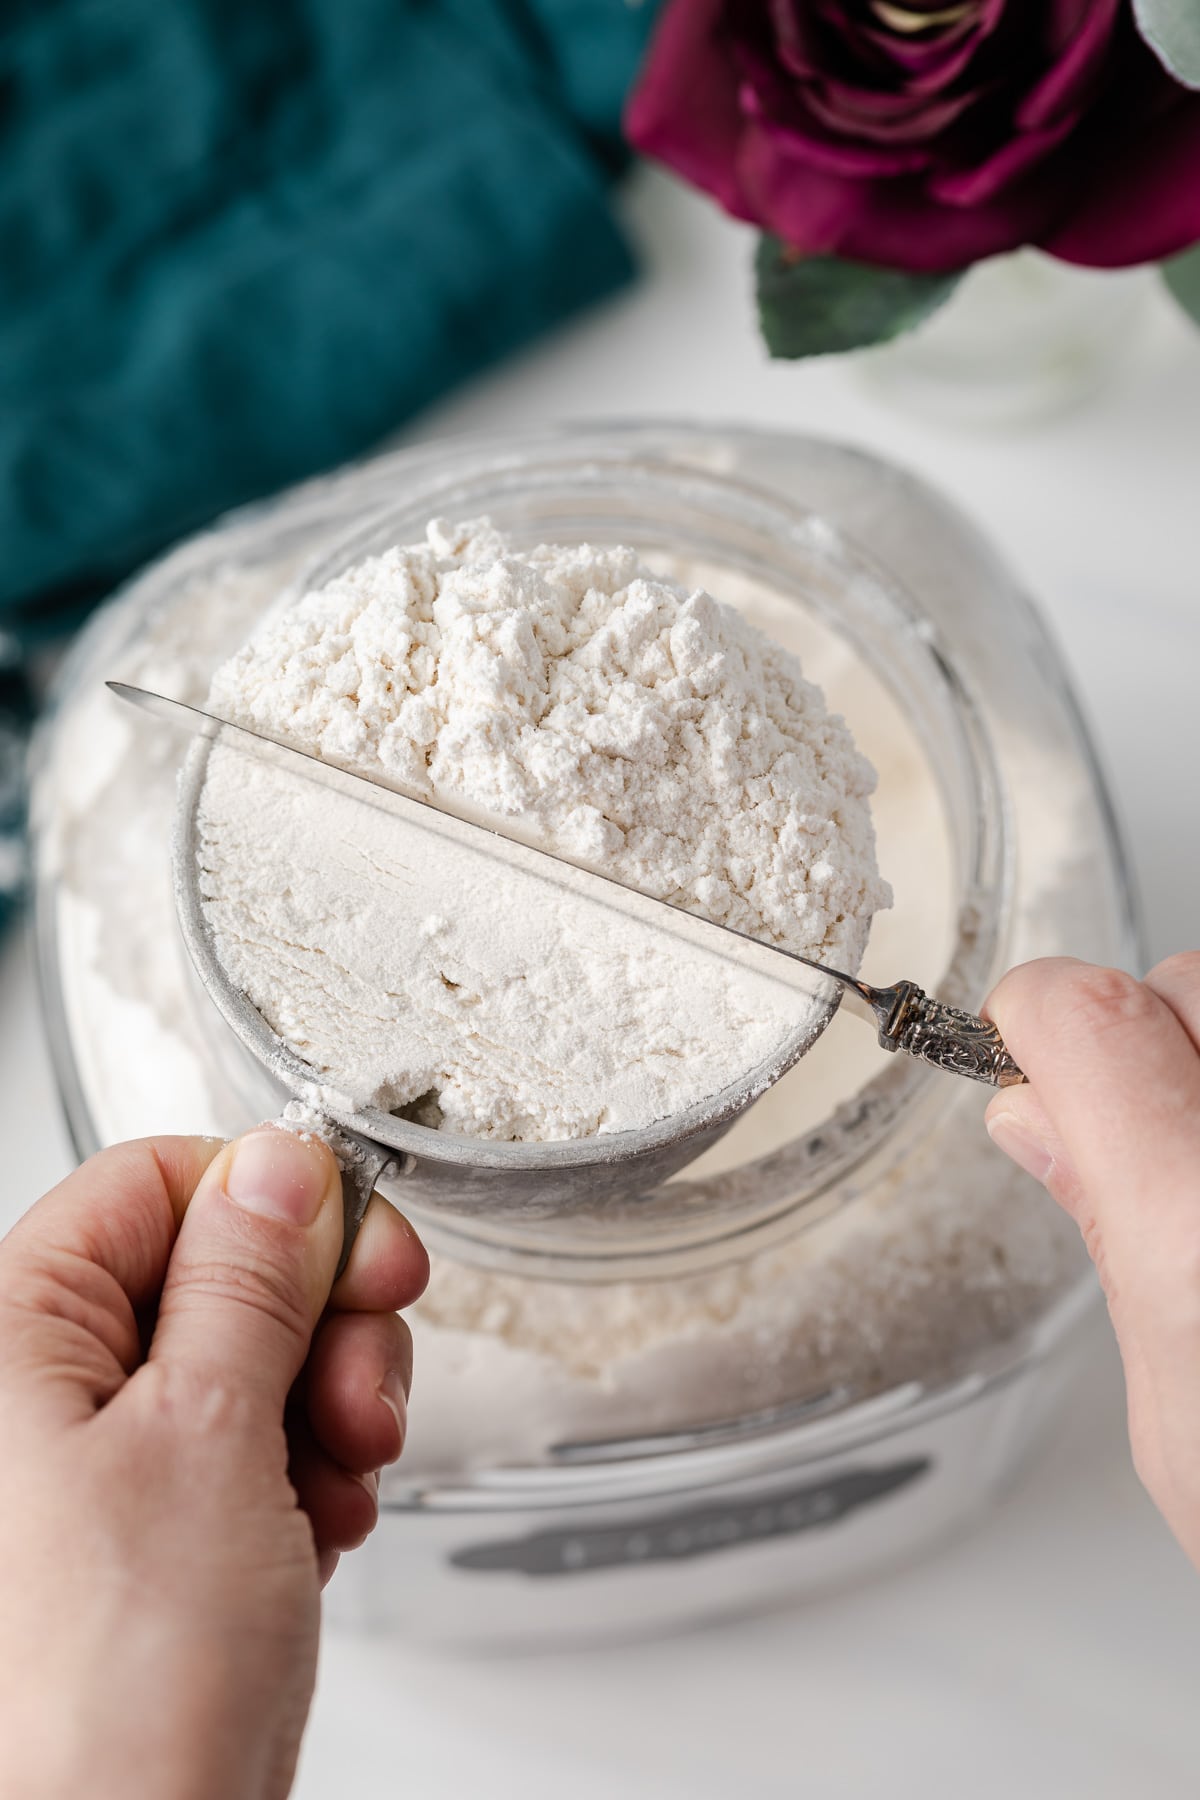 leveling flour in measuring cup with a knife